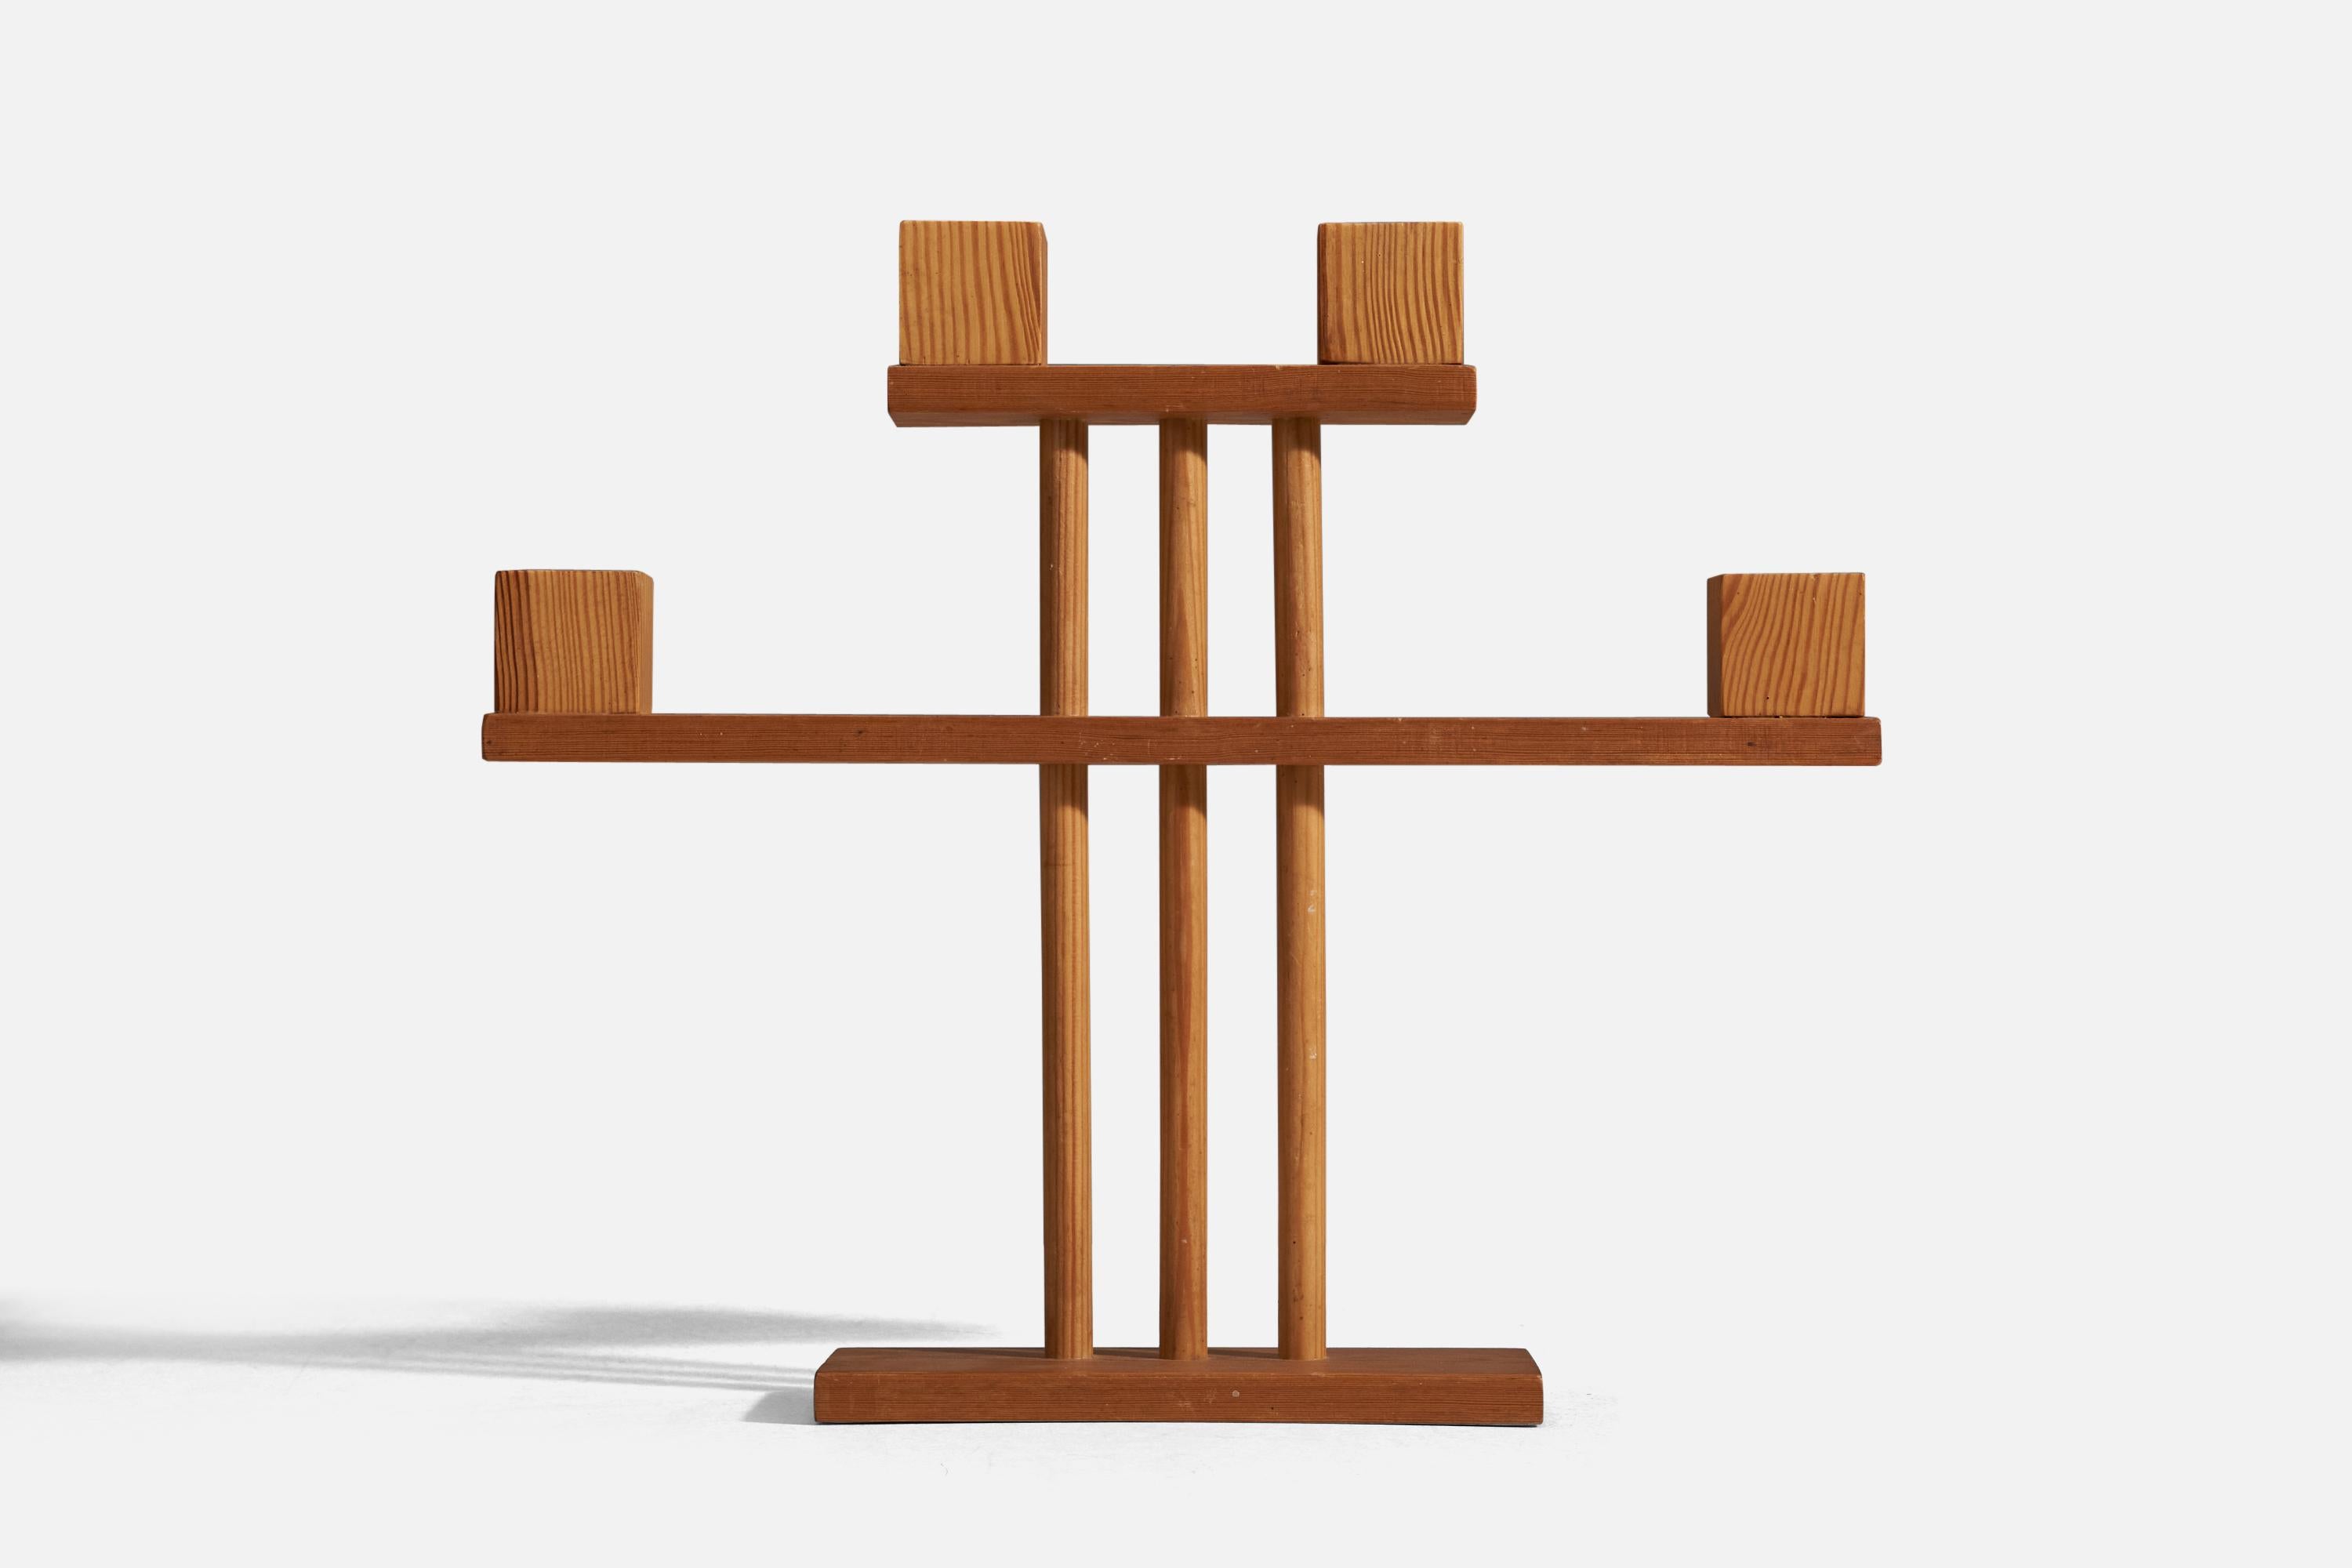 A pine candelabra designed and produced in Sweden, 1970s.